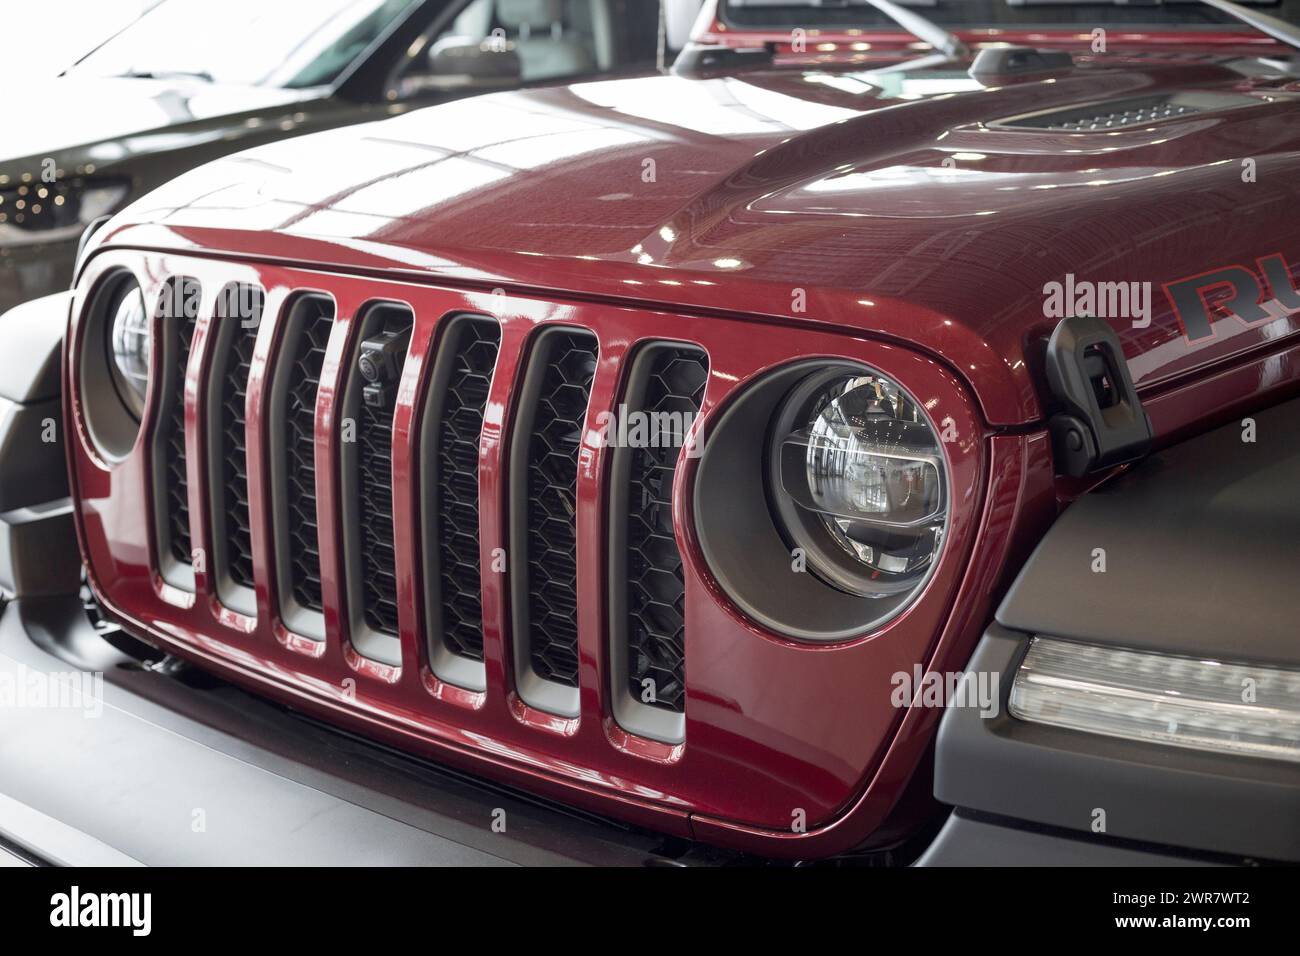 Russia, Izhevsk - March 4, 2022: Jeep showroom. Bumper of a new off-road. Wrangler Unlimited. Elegant round headlamps. Off-road vehicles. Stock Photo